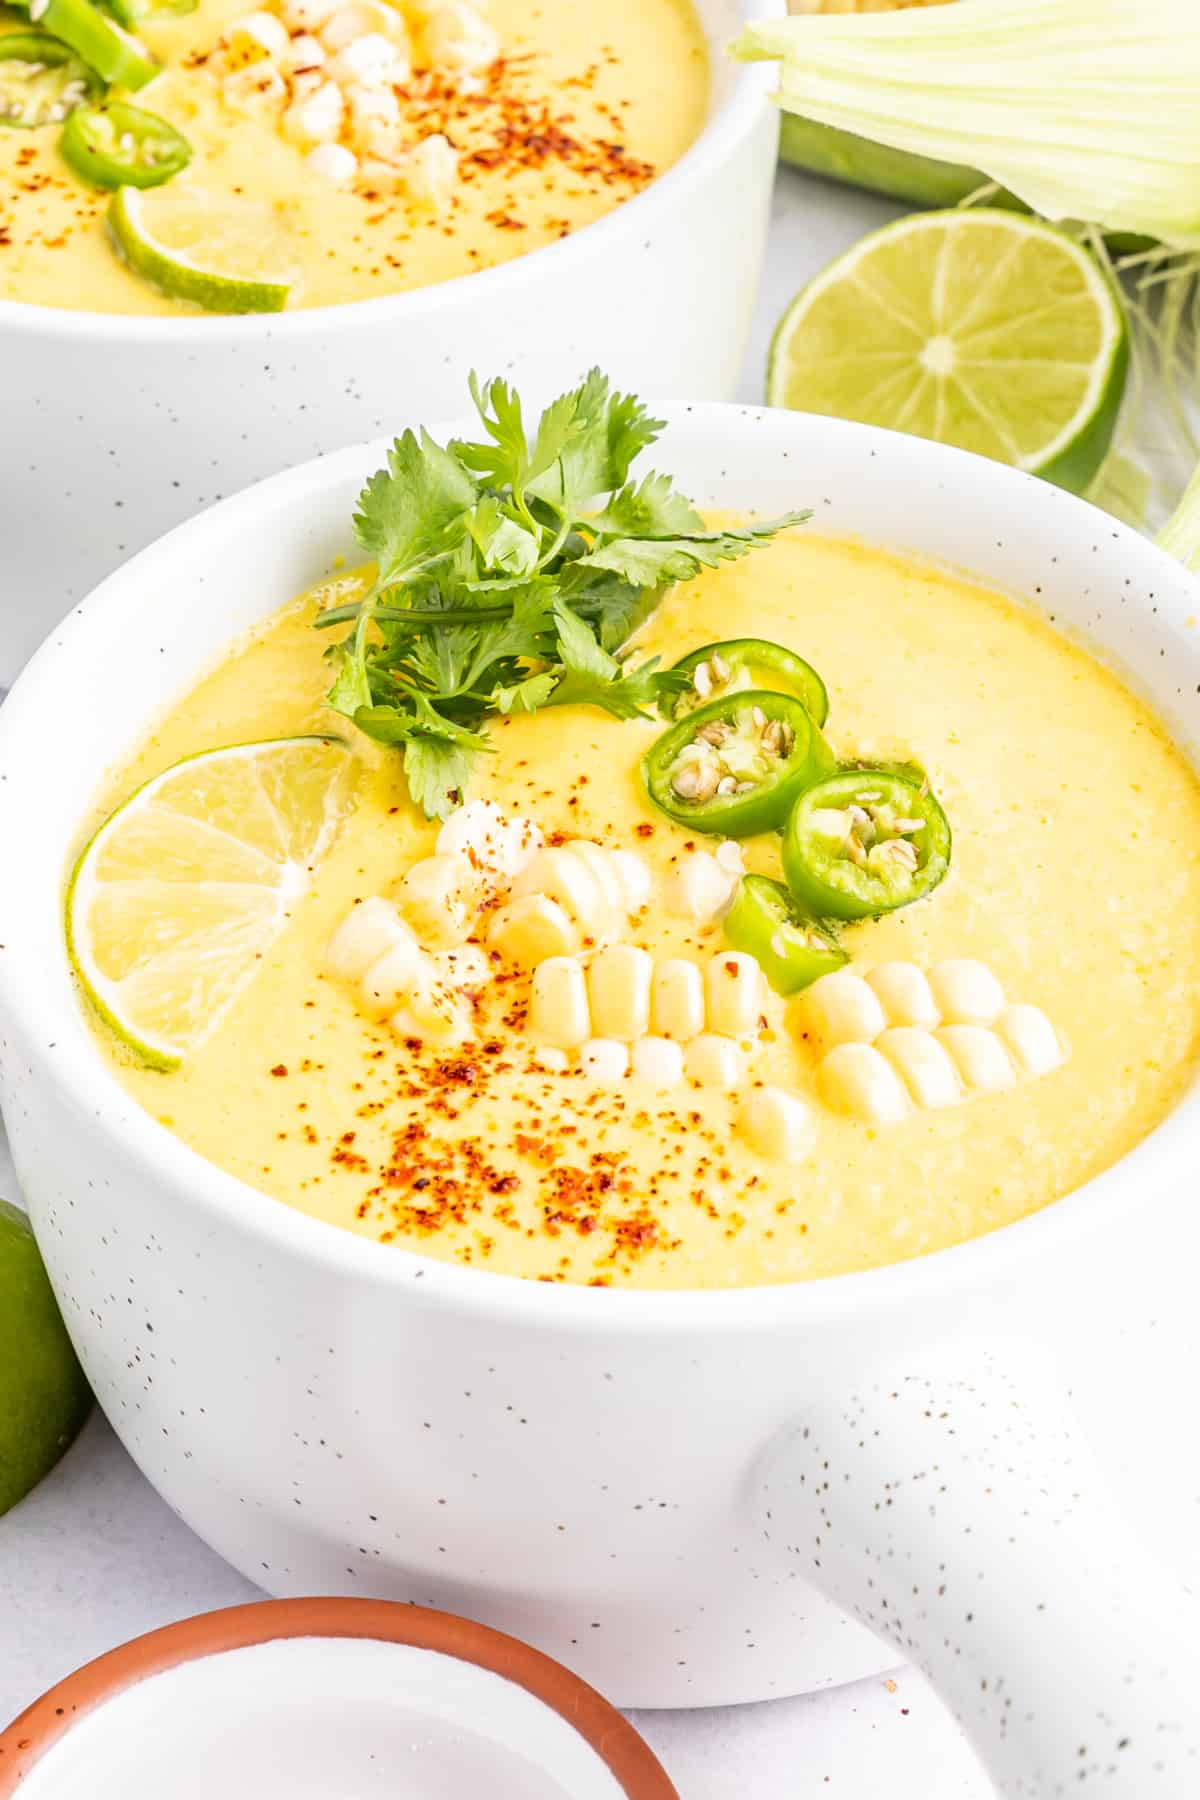 Bright yellow summer corn gazpacho in white bowls with handles. Garnished with corn pieces, sliced Serrano pepper, cilantro, and paprika. A full ear of corn sitting alongside bowls of soup, with extra line wedges, spoons, and a small bowl of paprika.